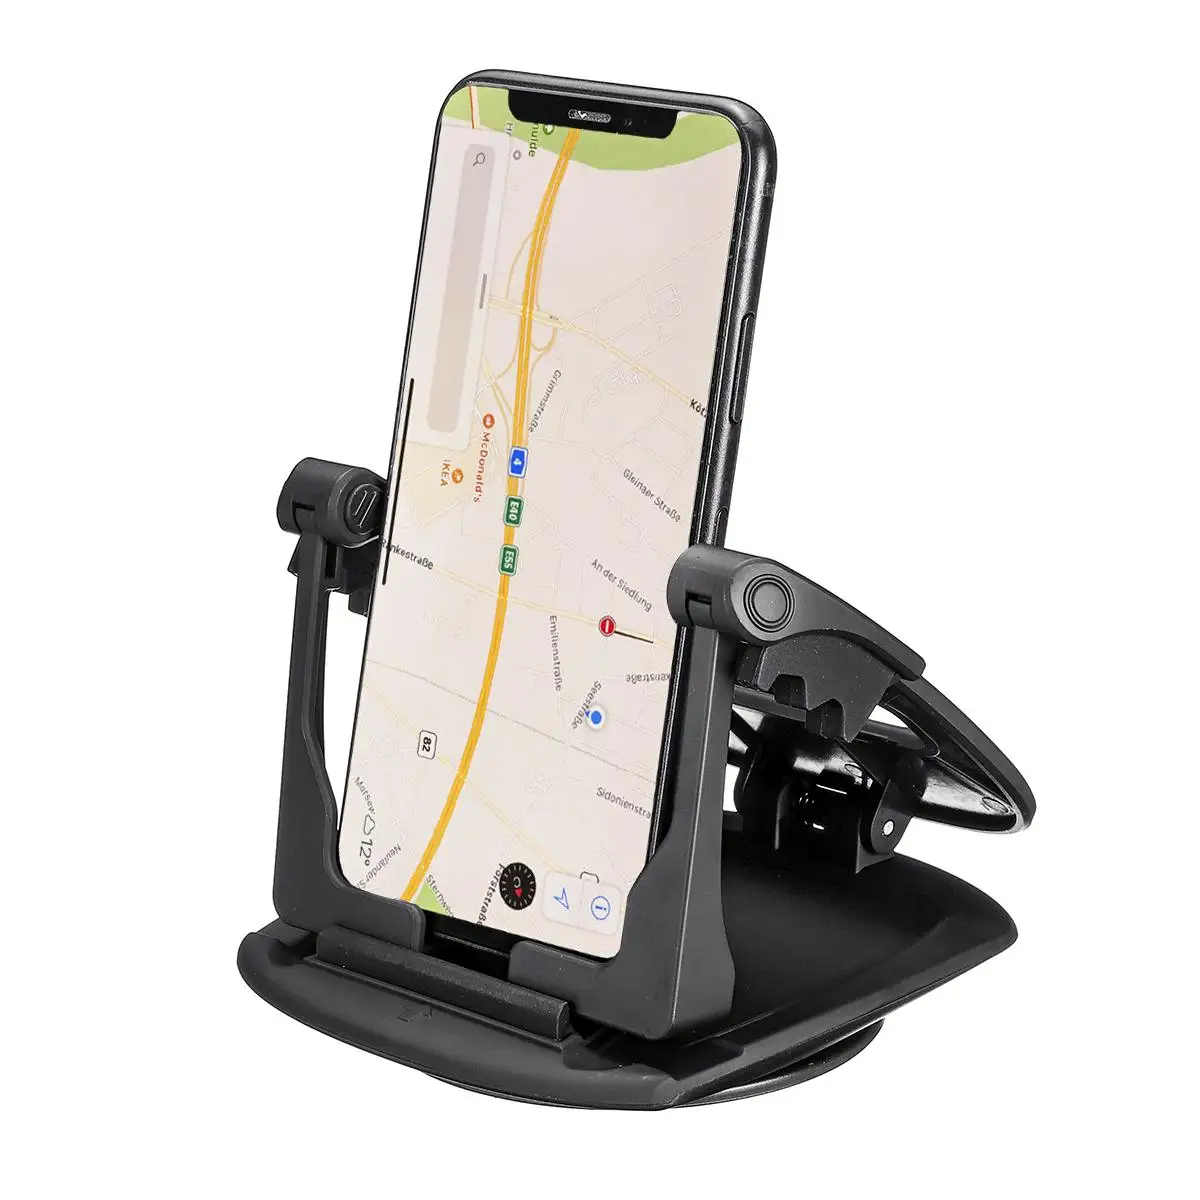 360 degree rotation car dashboard suction cup car phone holder clamp car mount holder for 3 5 6 5 inch smartphone for iphone 11 free global shipping